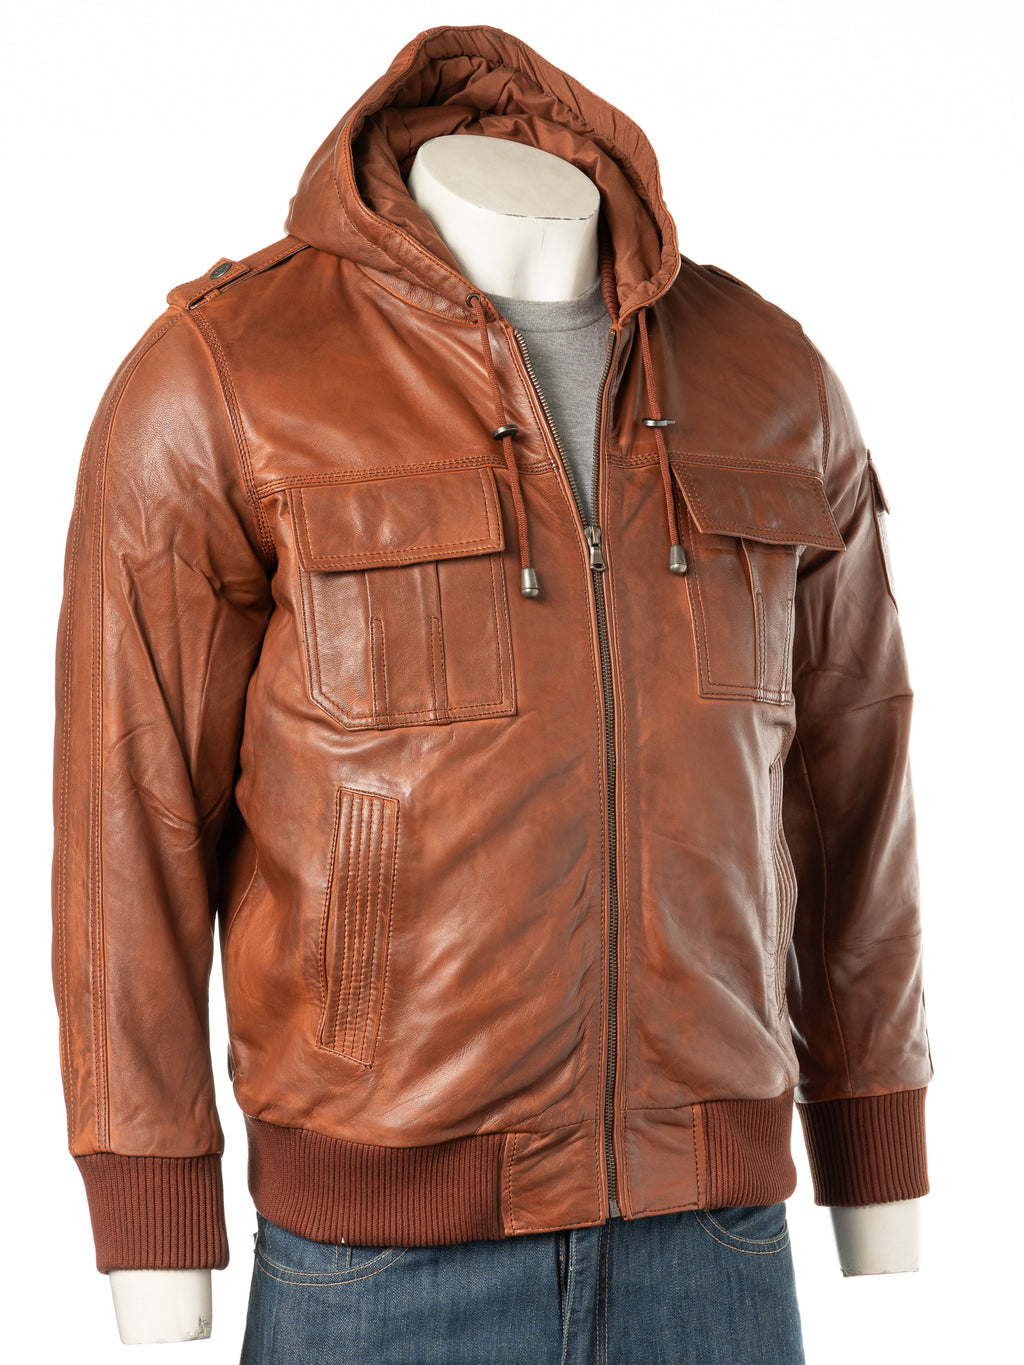 Men's Timber Hooded Bomber Style Leather Jacket: Cesare